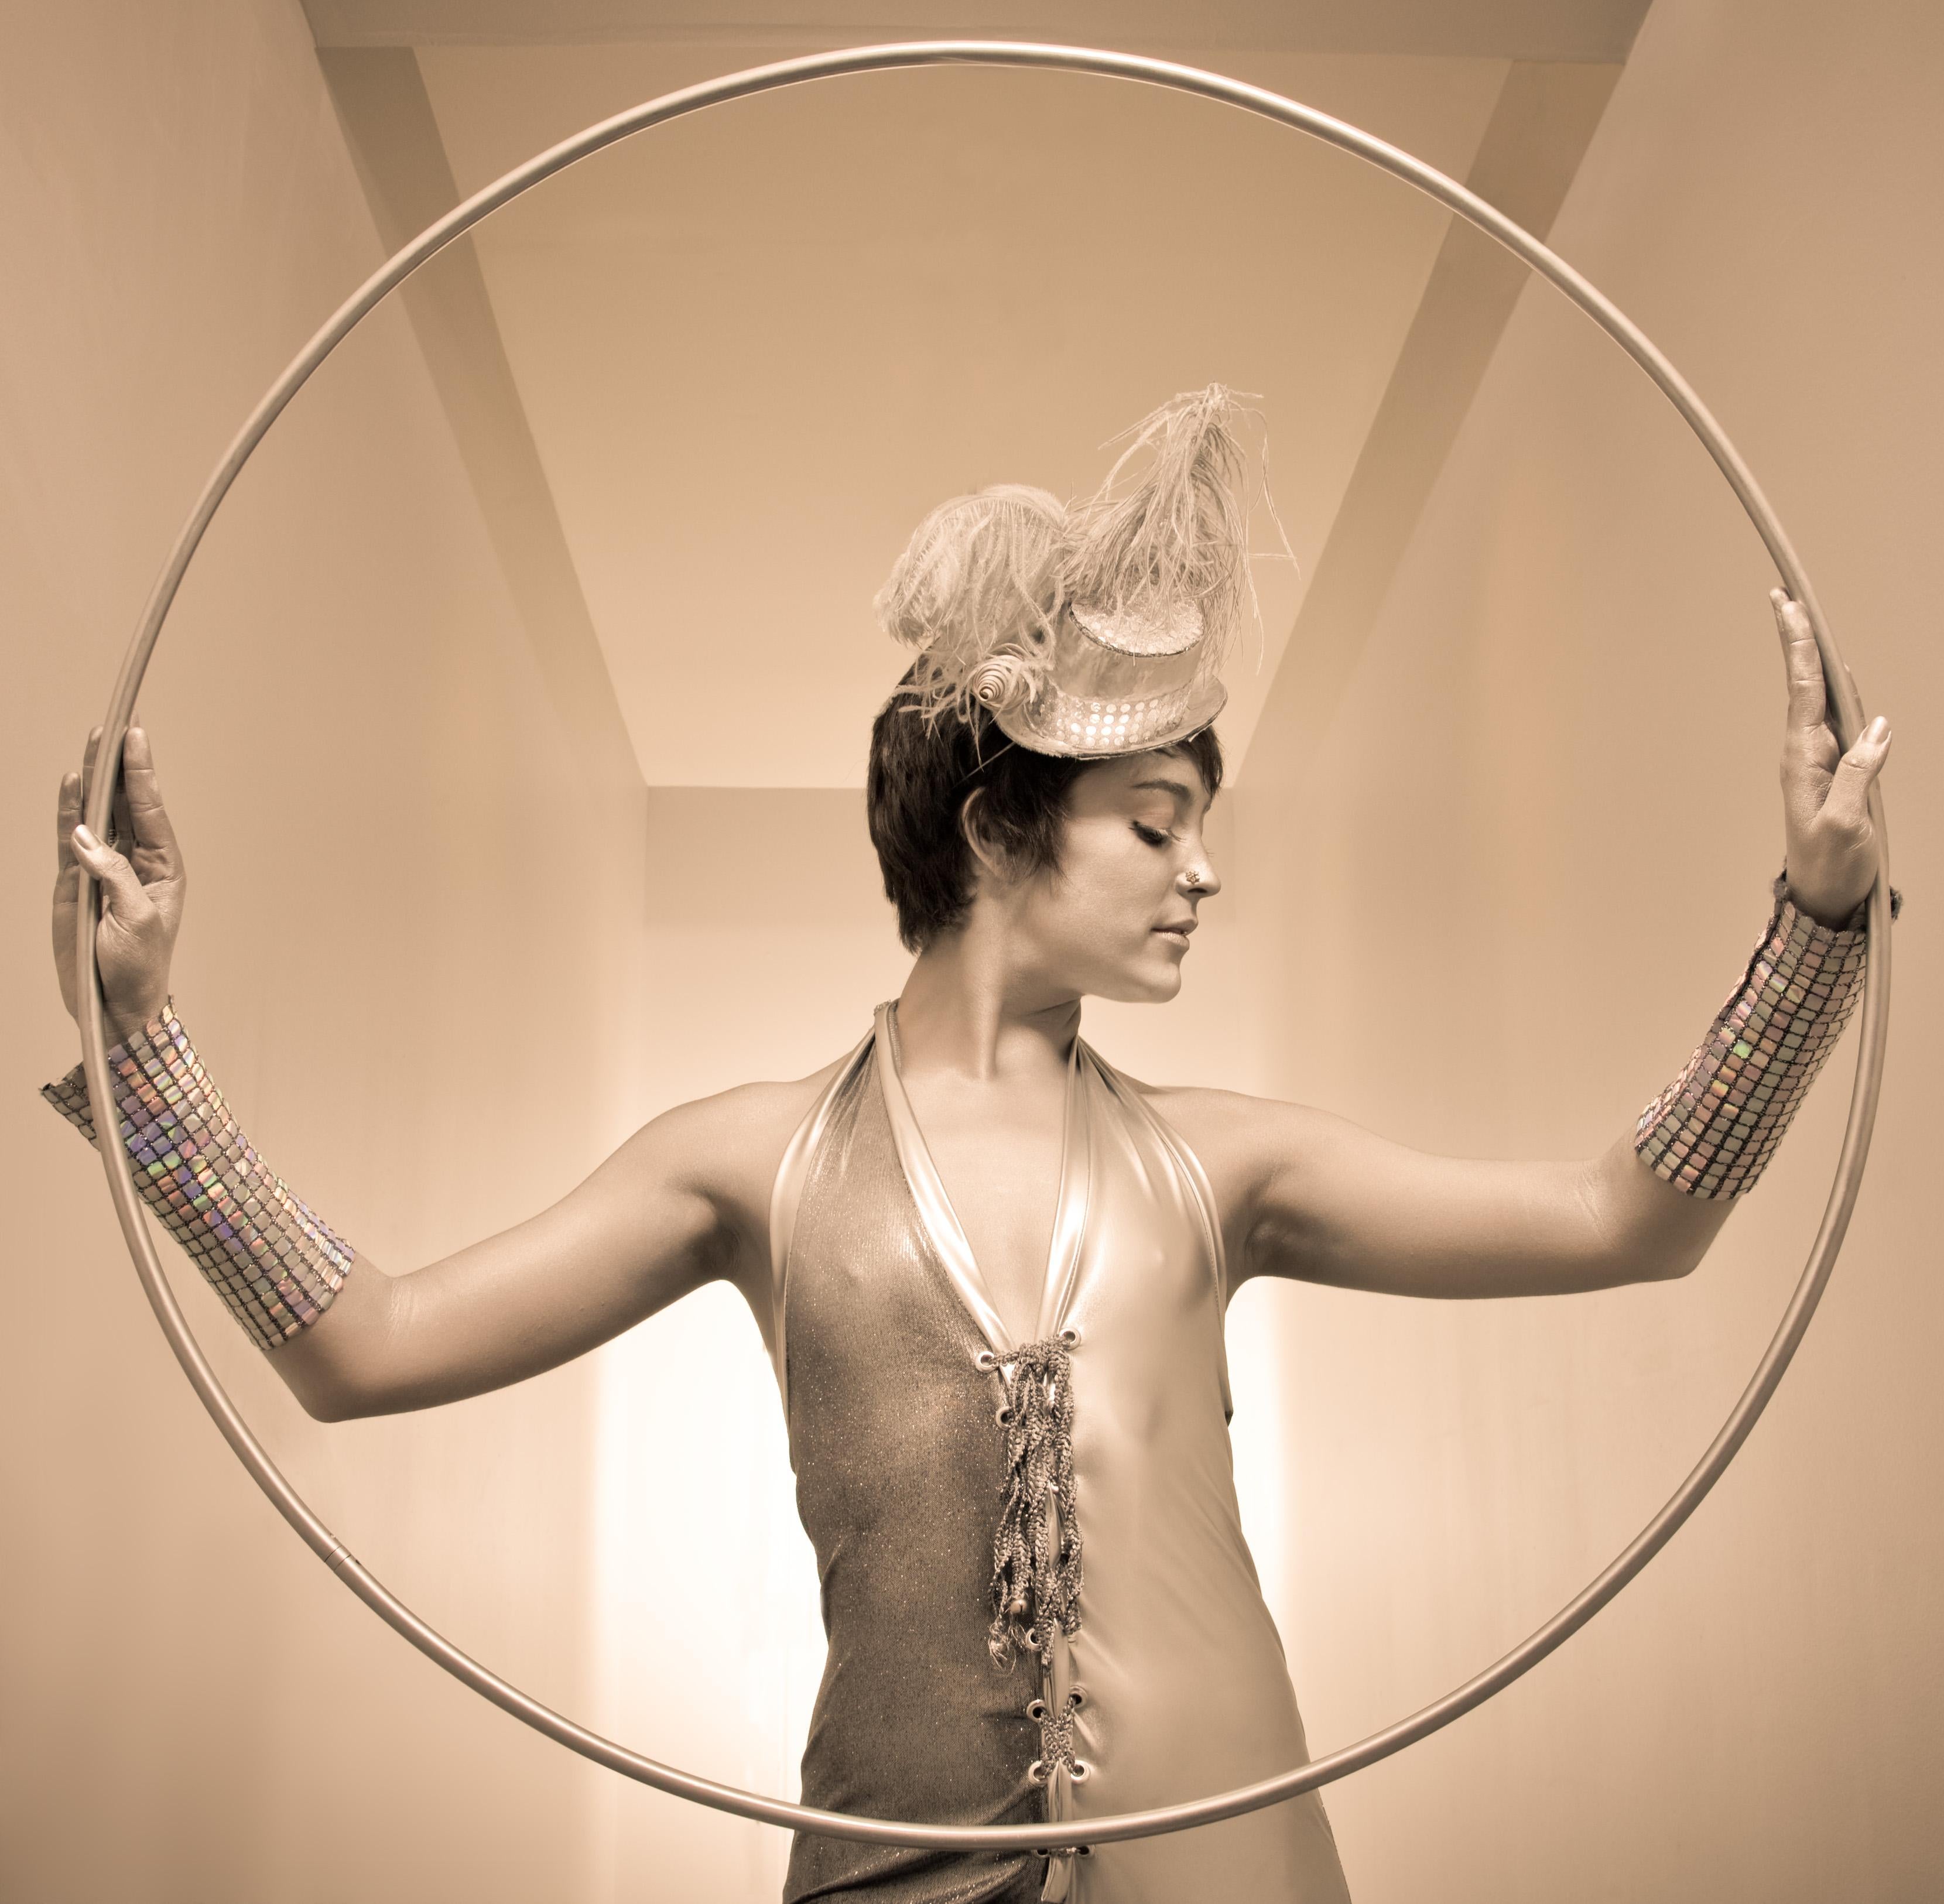 Hoop Girl - Photograph by Nick Vedros